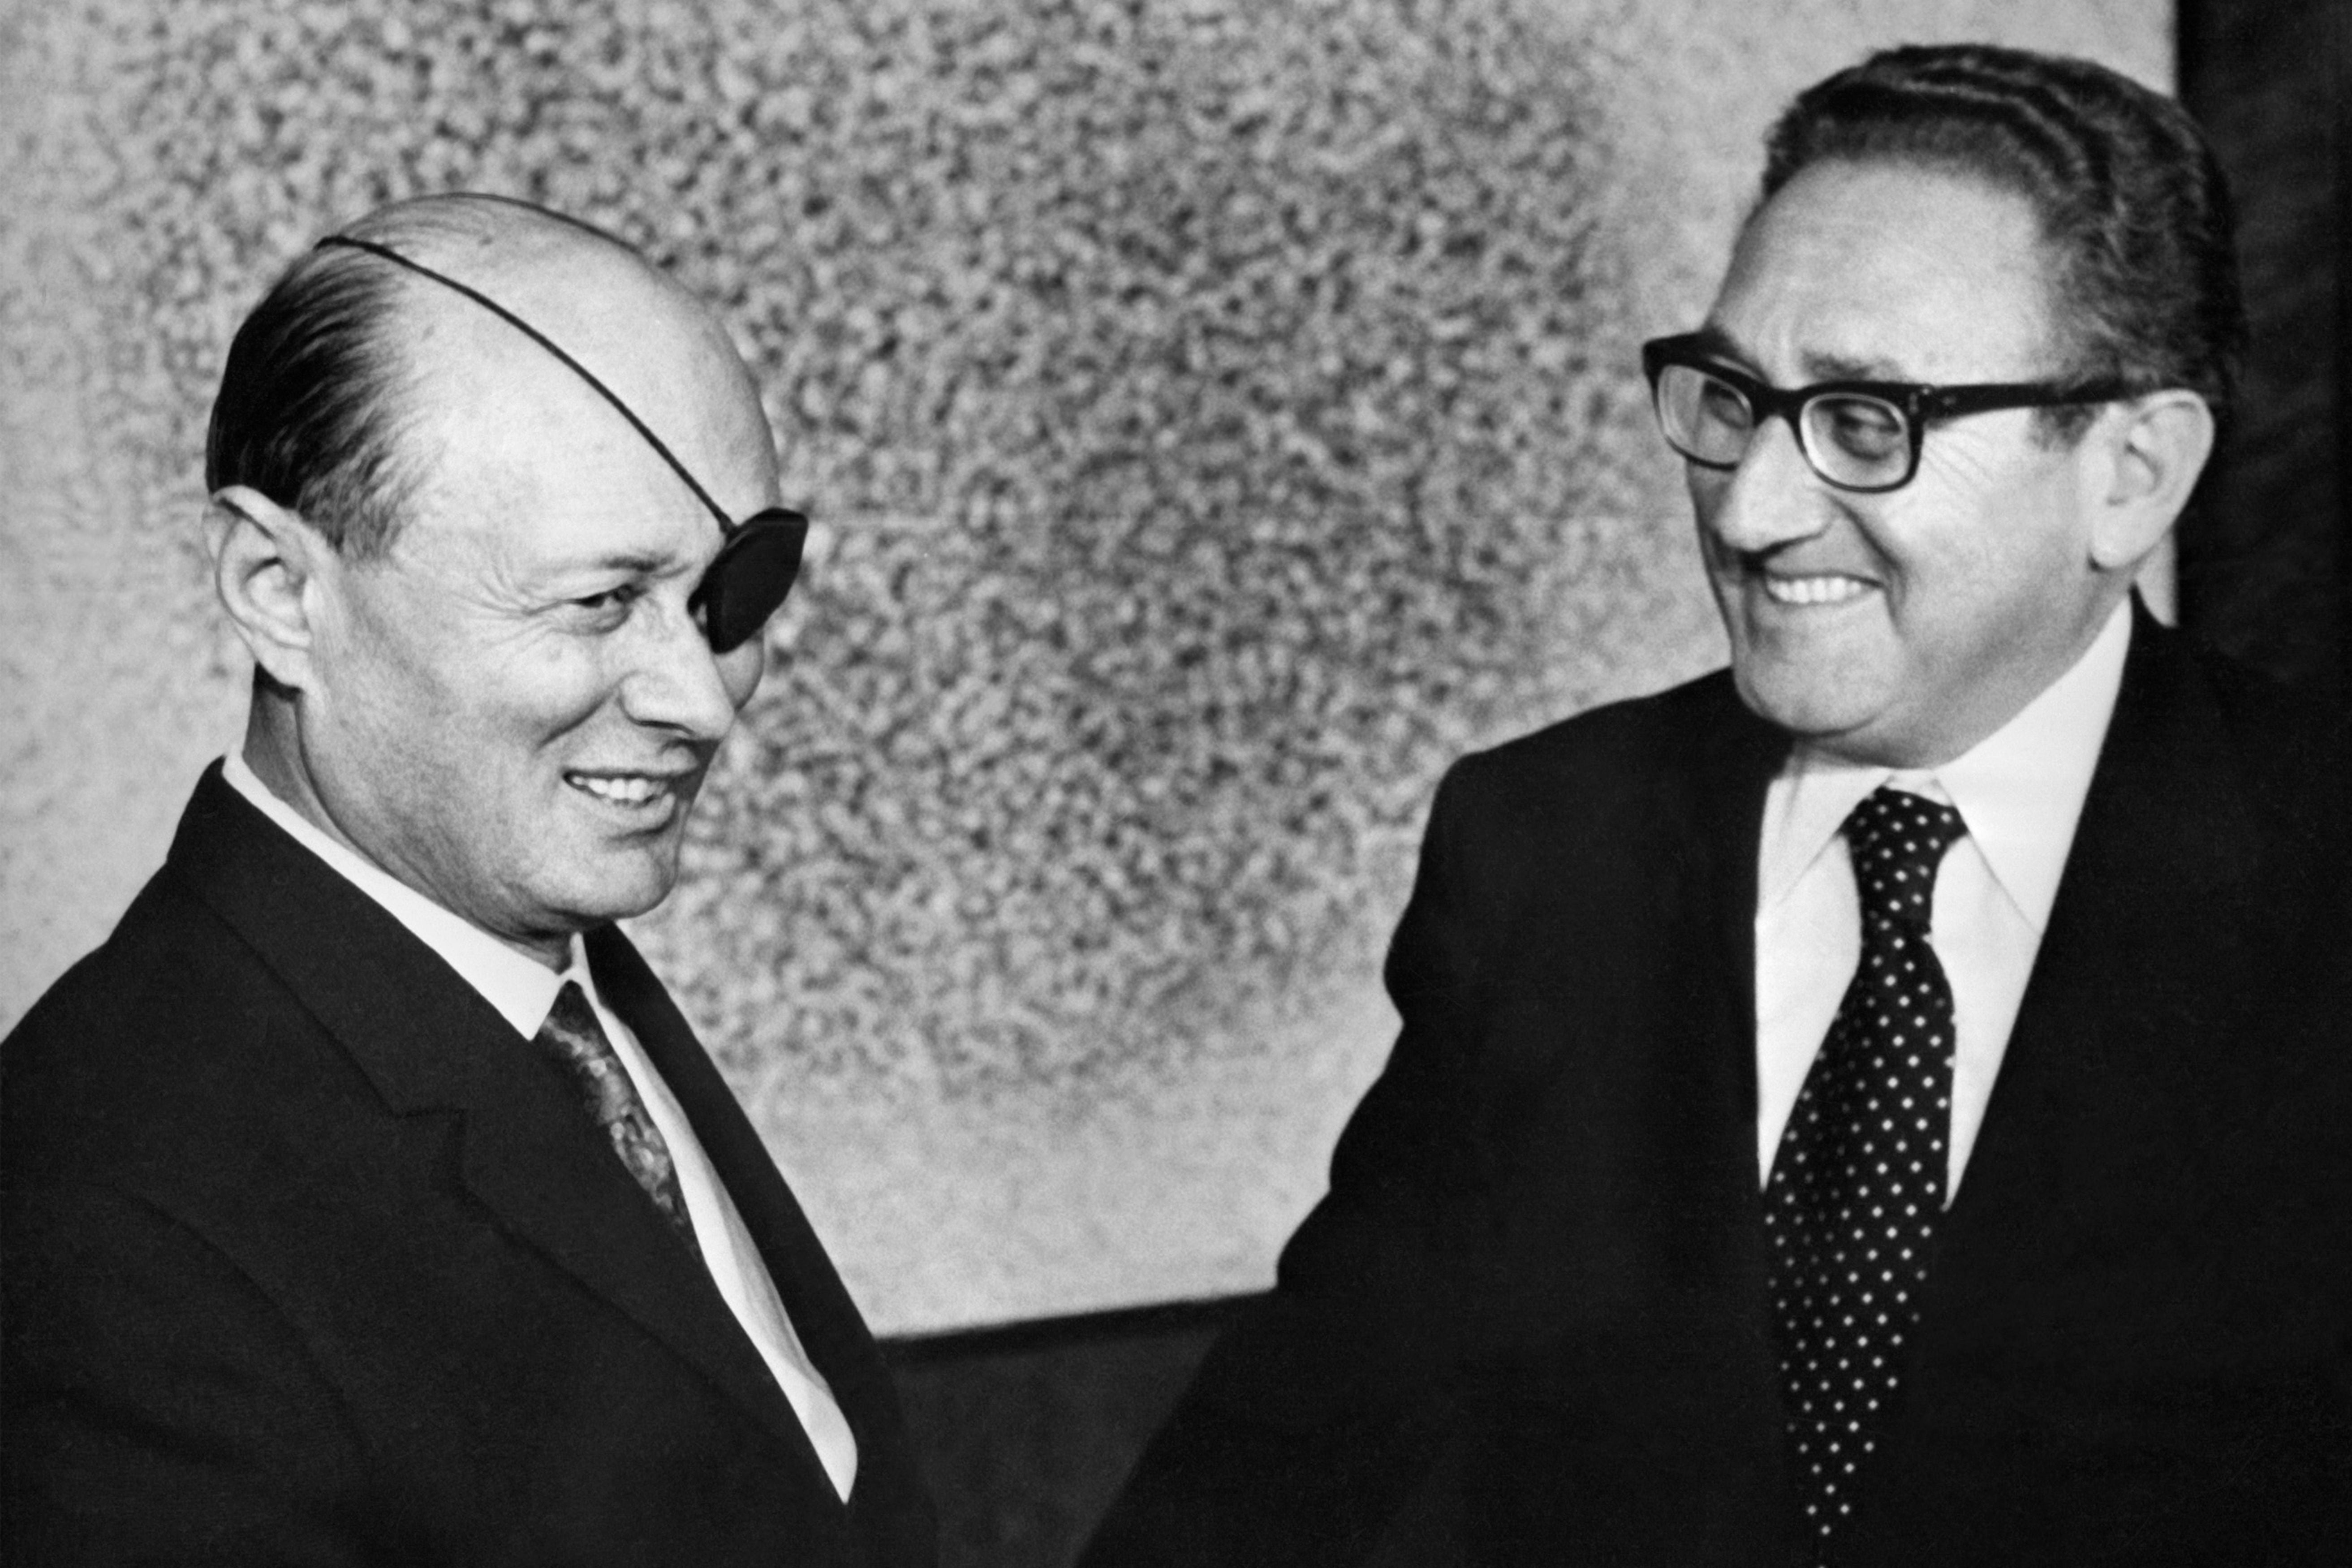 US Secretary of State Henry Kissinger, right, meets with Israel’s Defence Minister Moshe Dayan in Tel Aviv on 8 January, 1974